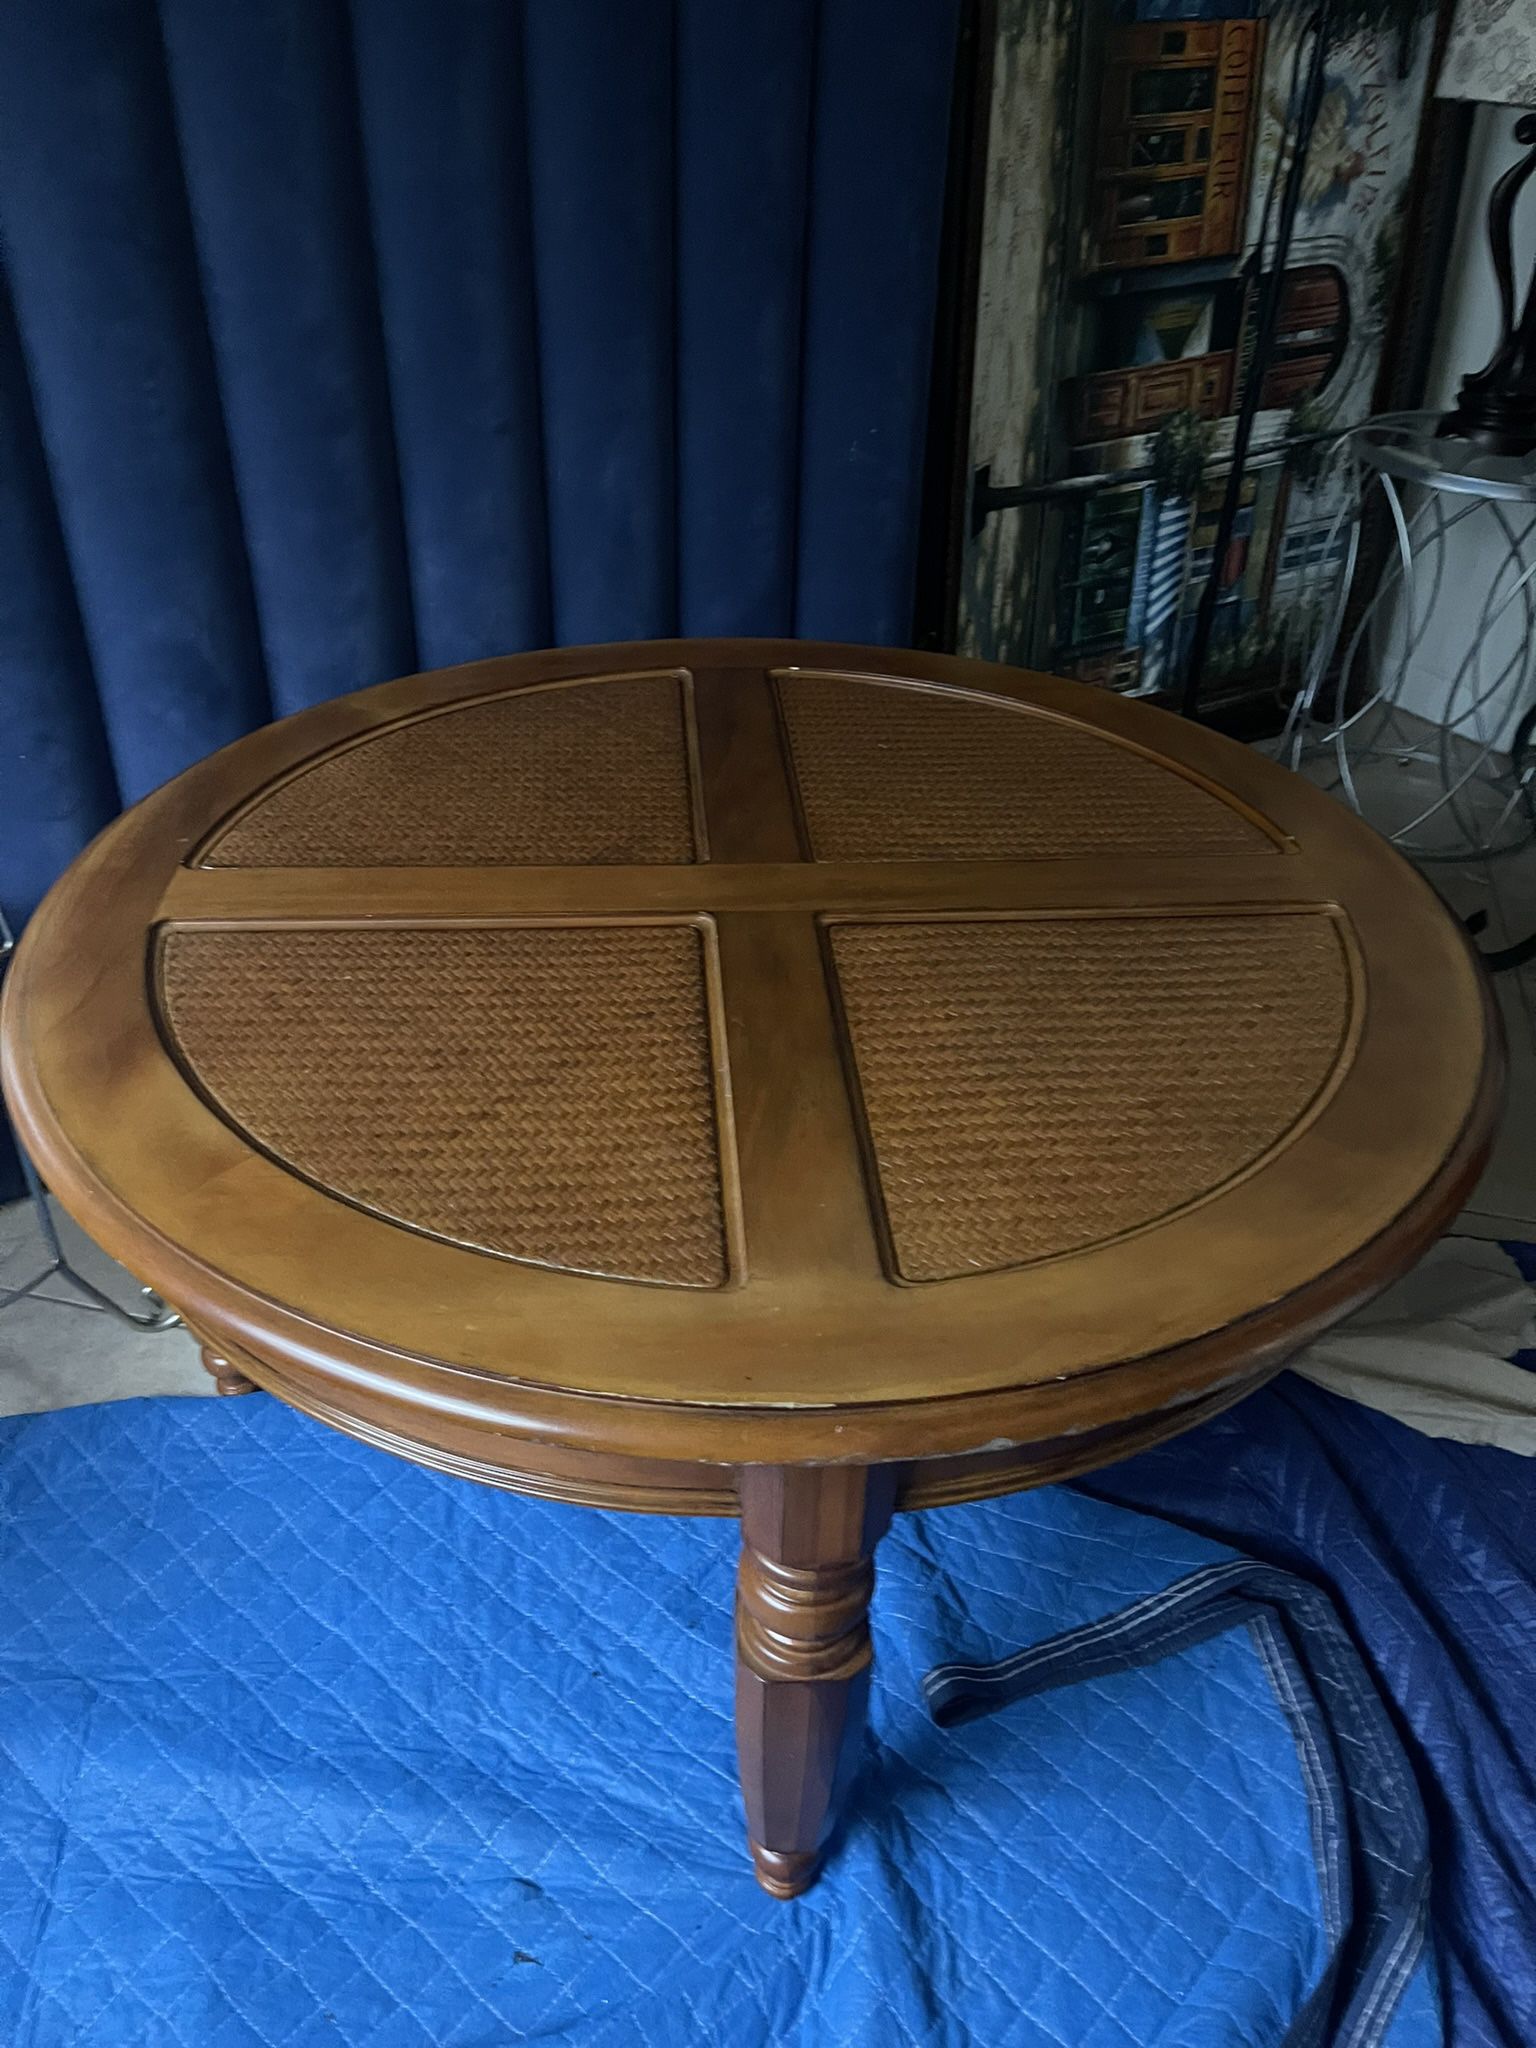 Small Wood Coffee Table - $20